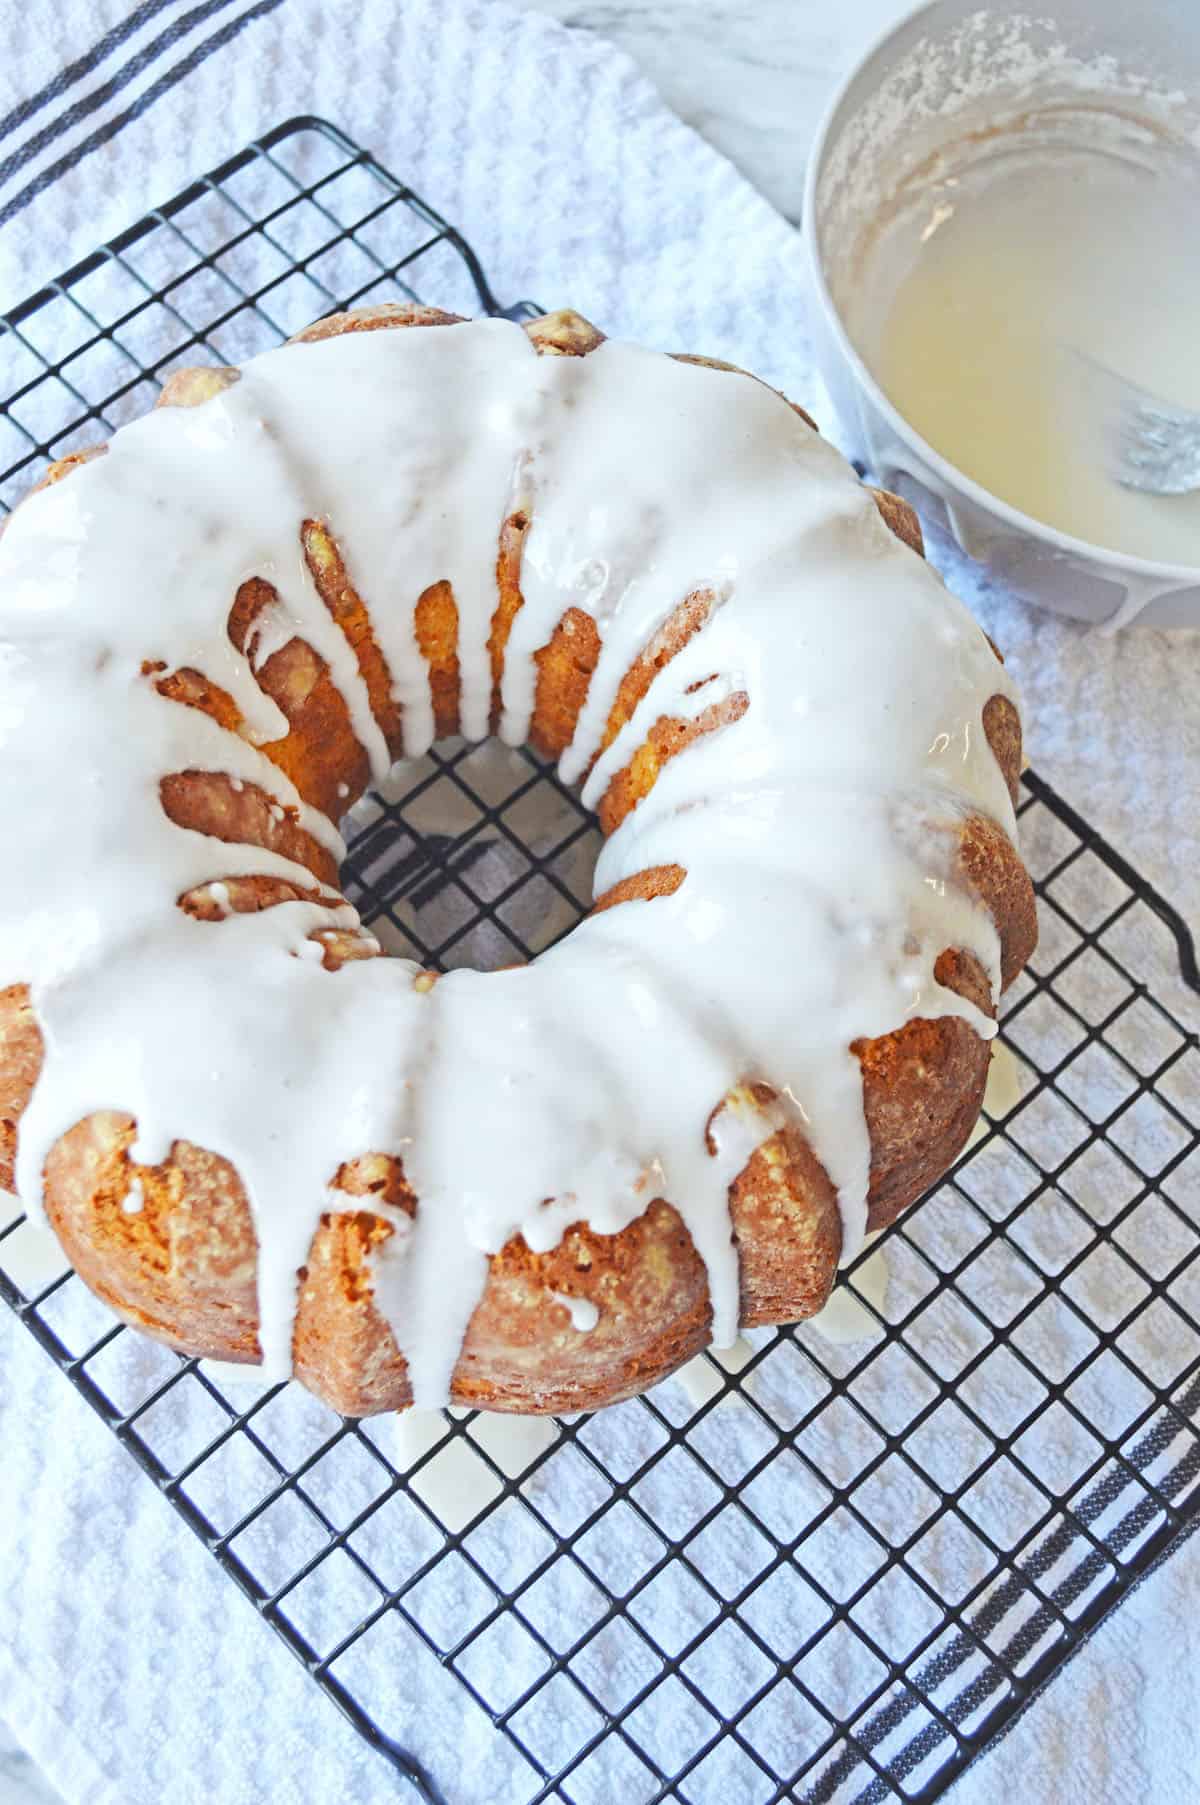 Whole Italian lemon pound cake with icing on a wire rack.